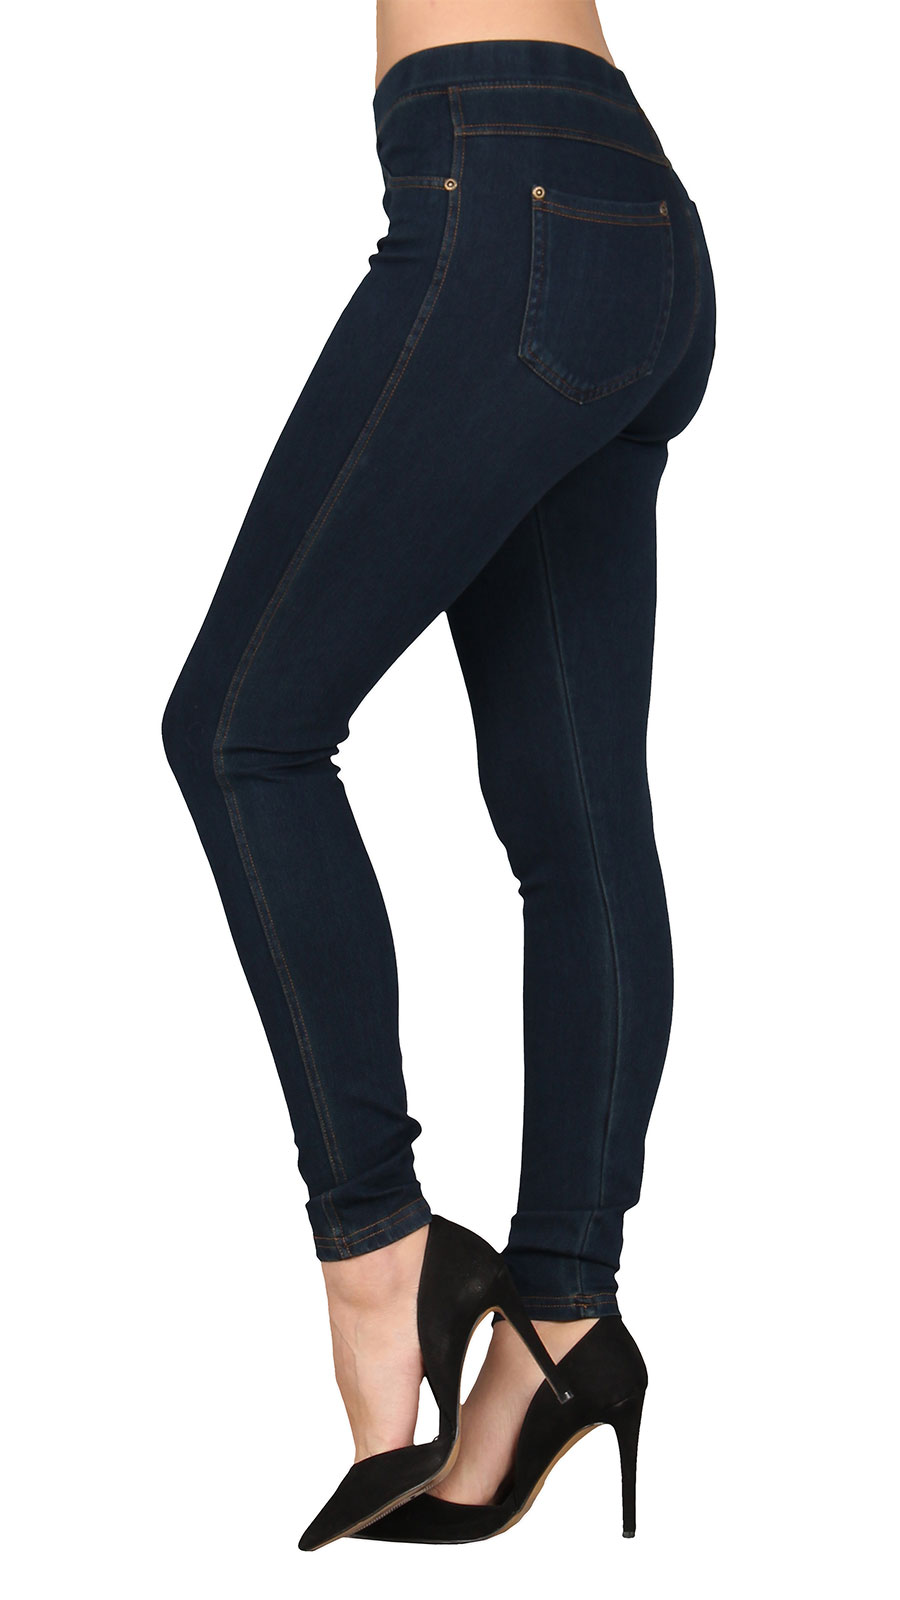 Lildy Women’s Real Denim Skinny Jean Jeggings, Stretchable Cotton Blend ...